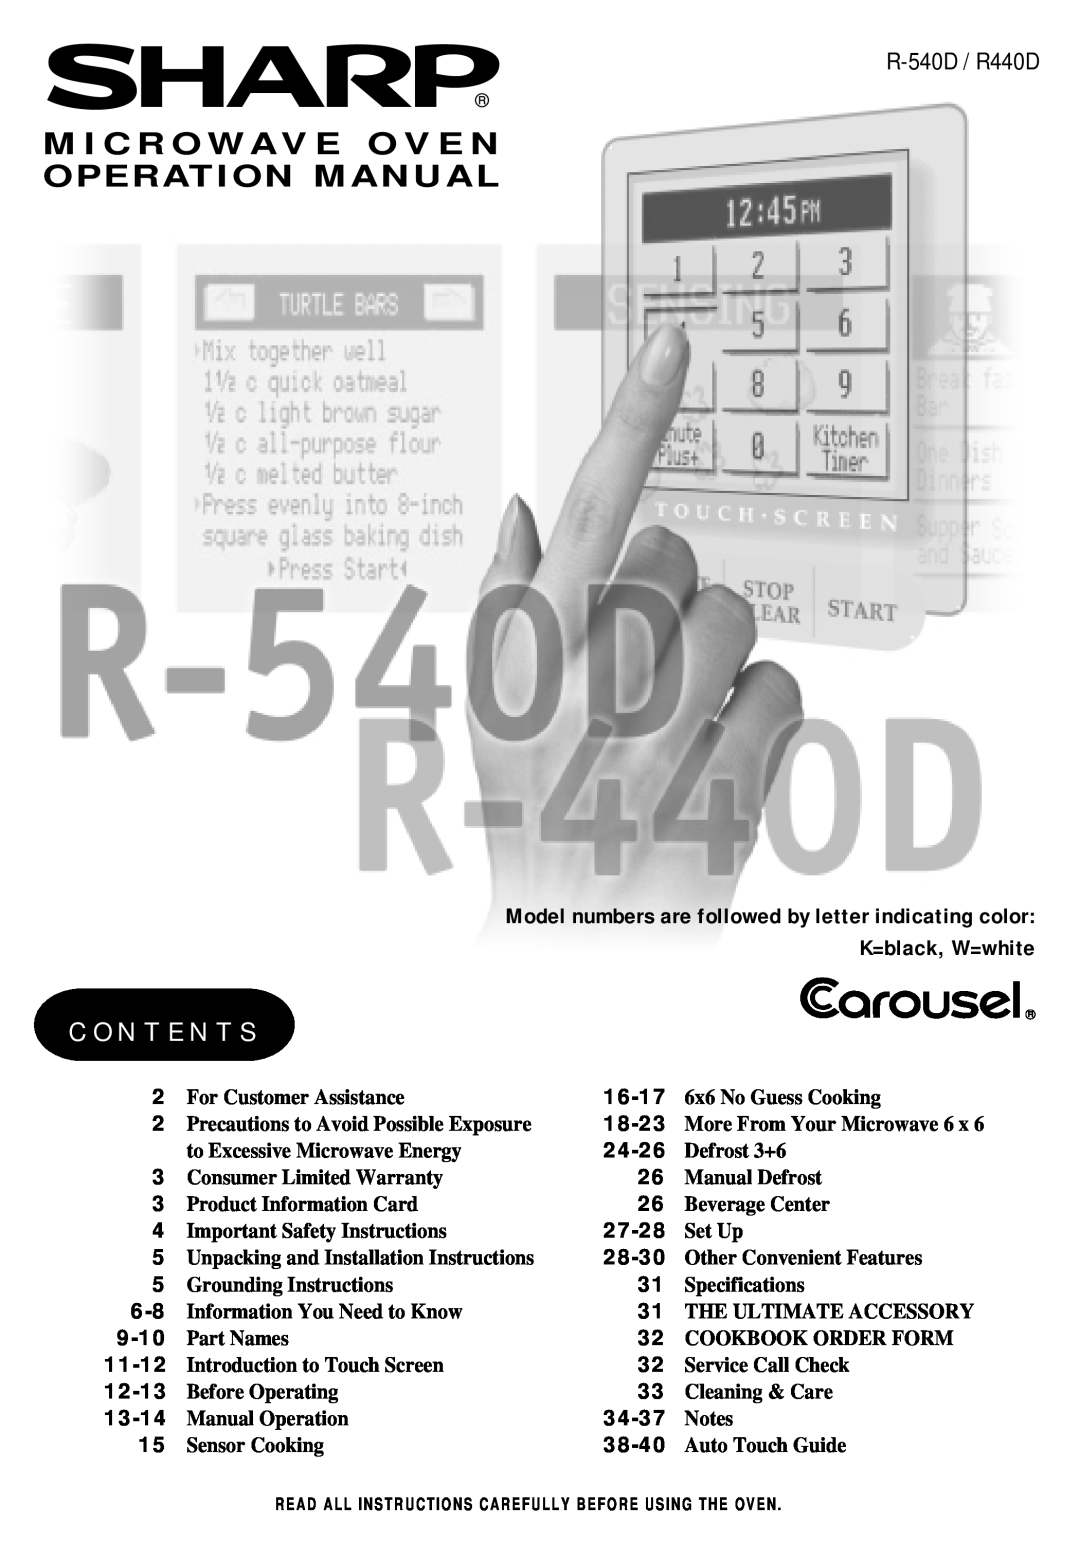 Sharp R-440/540 operation manual C O N T E N T S, R-540D /R440D, K=black, W=white, Microwave Oven Operation Manual 